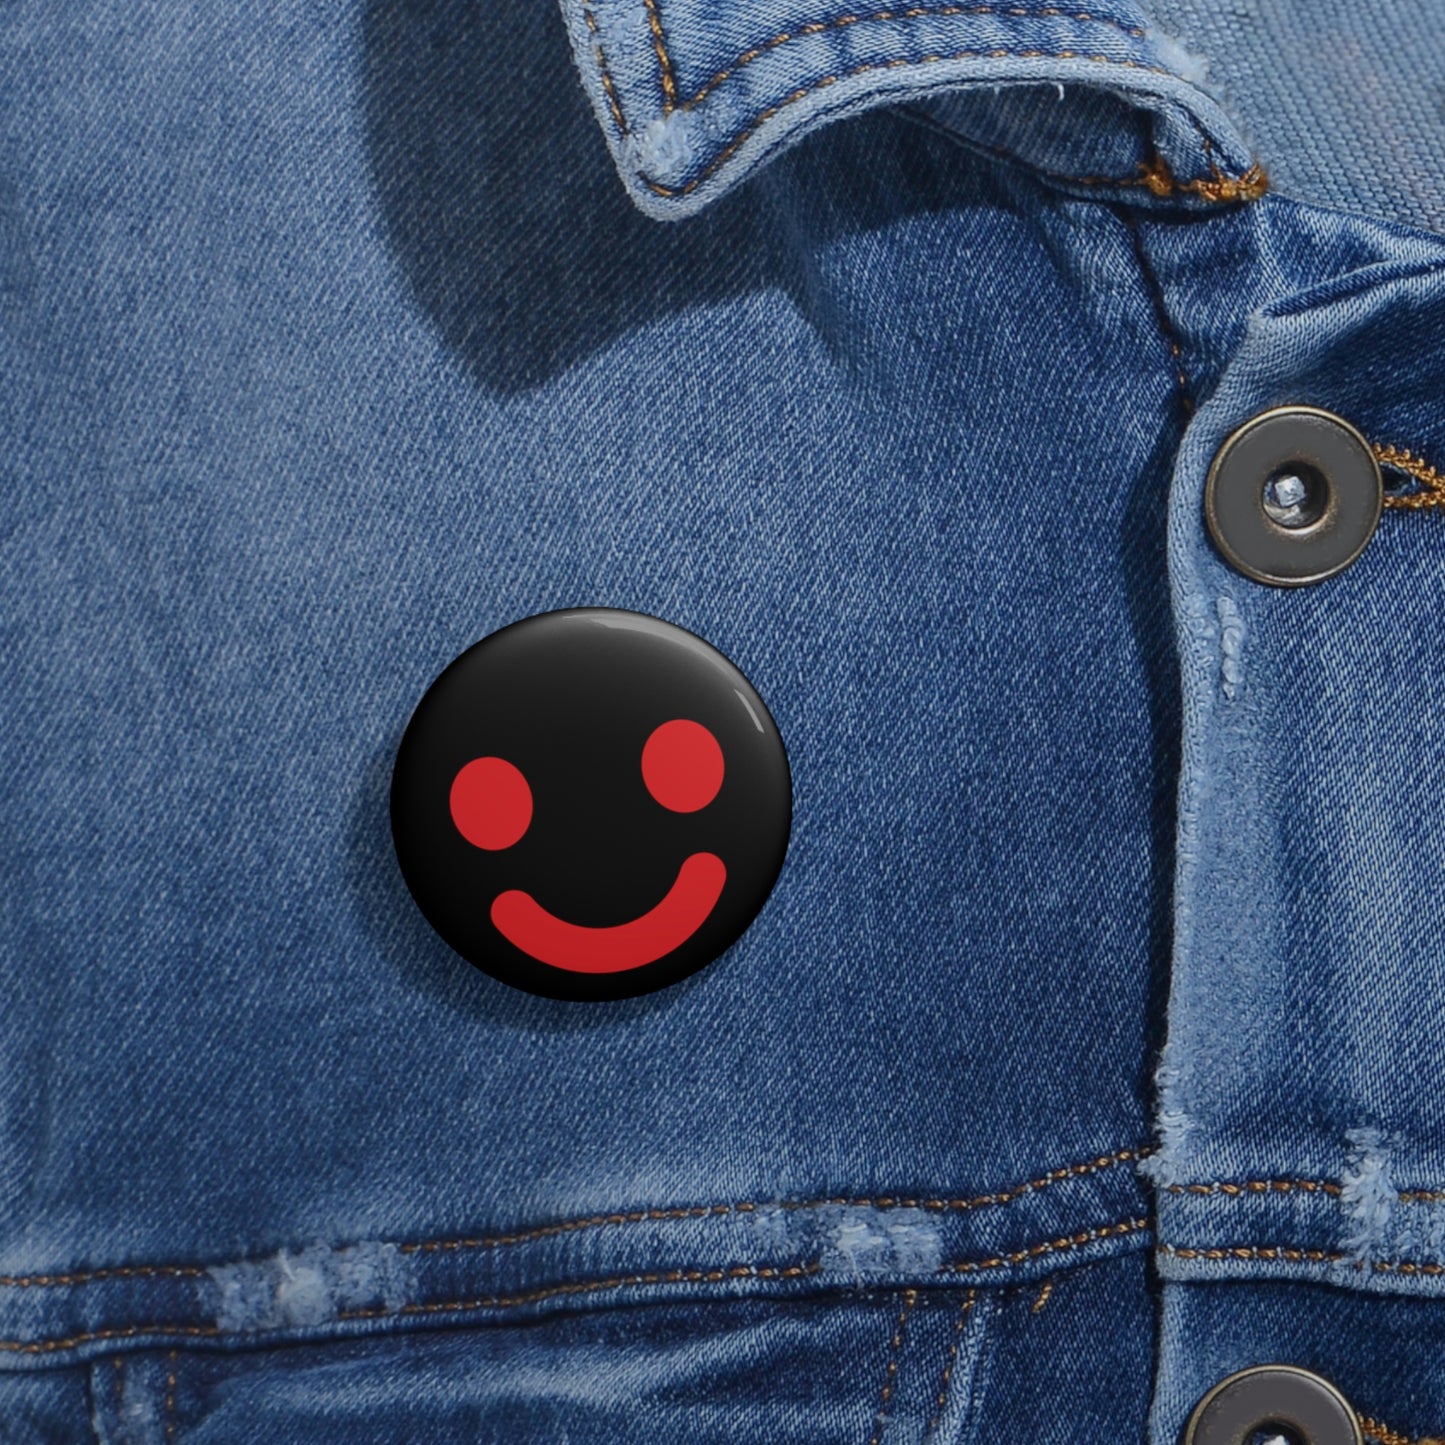 Smiley Face Custom Pin Buttons